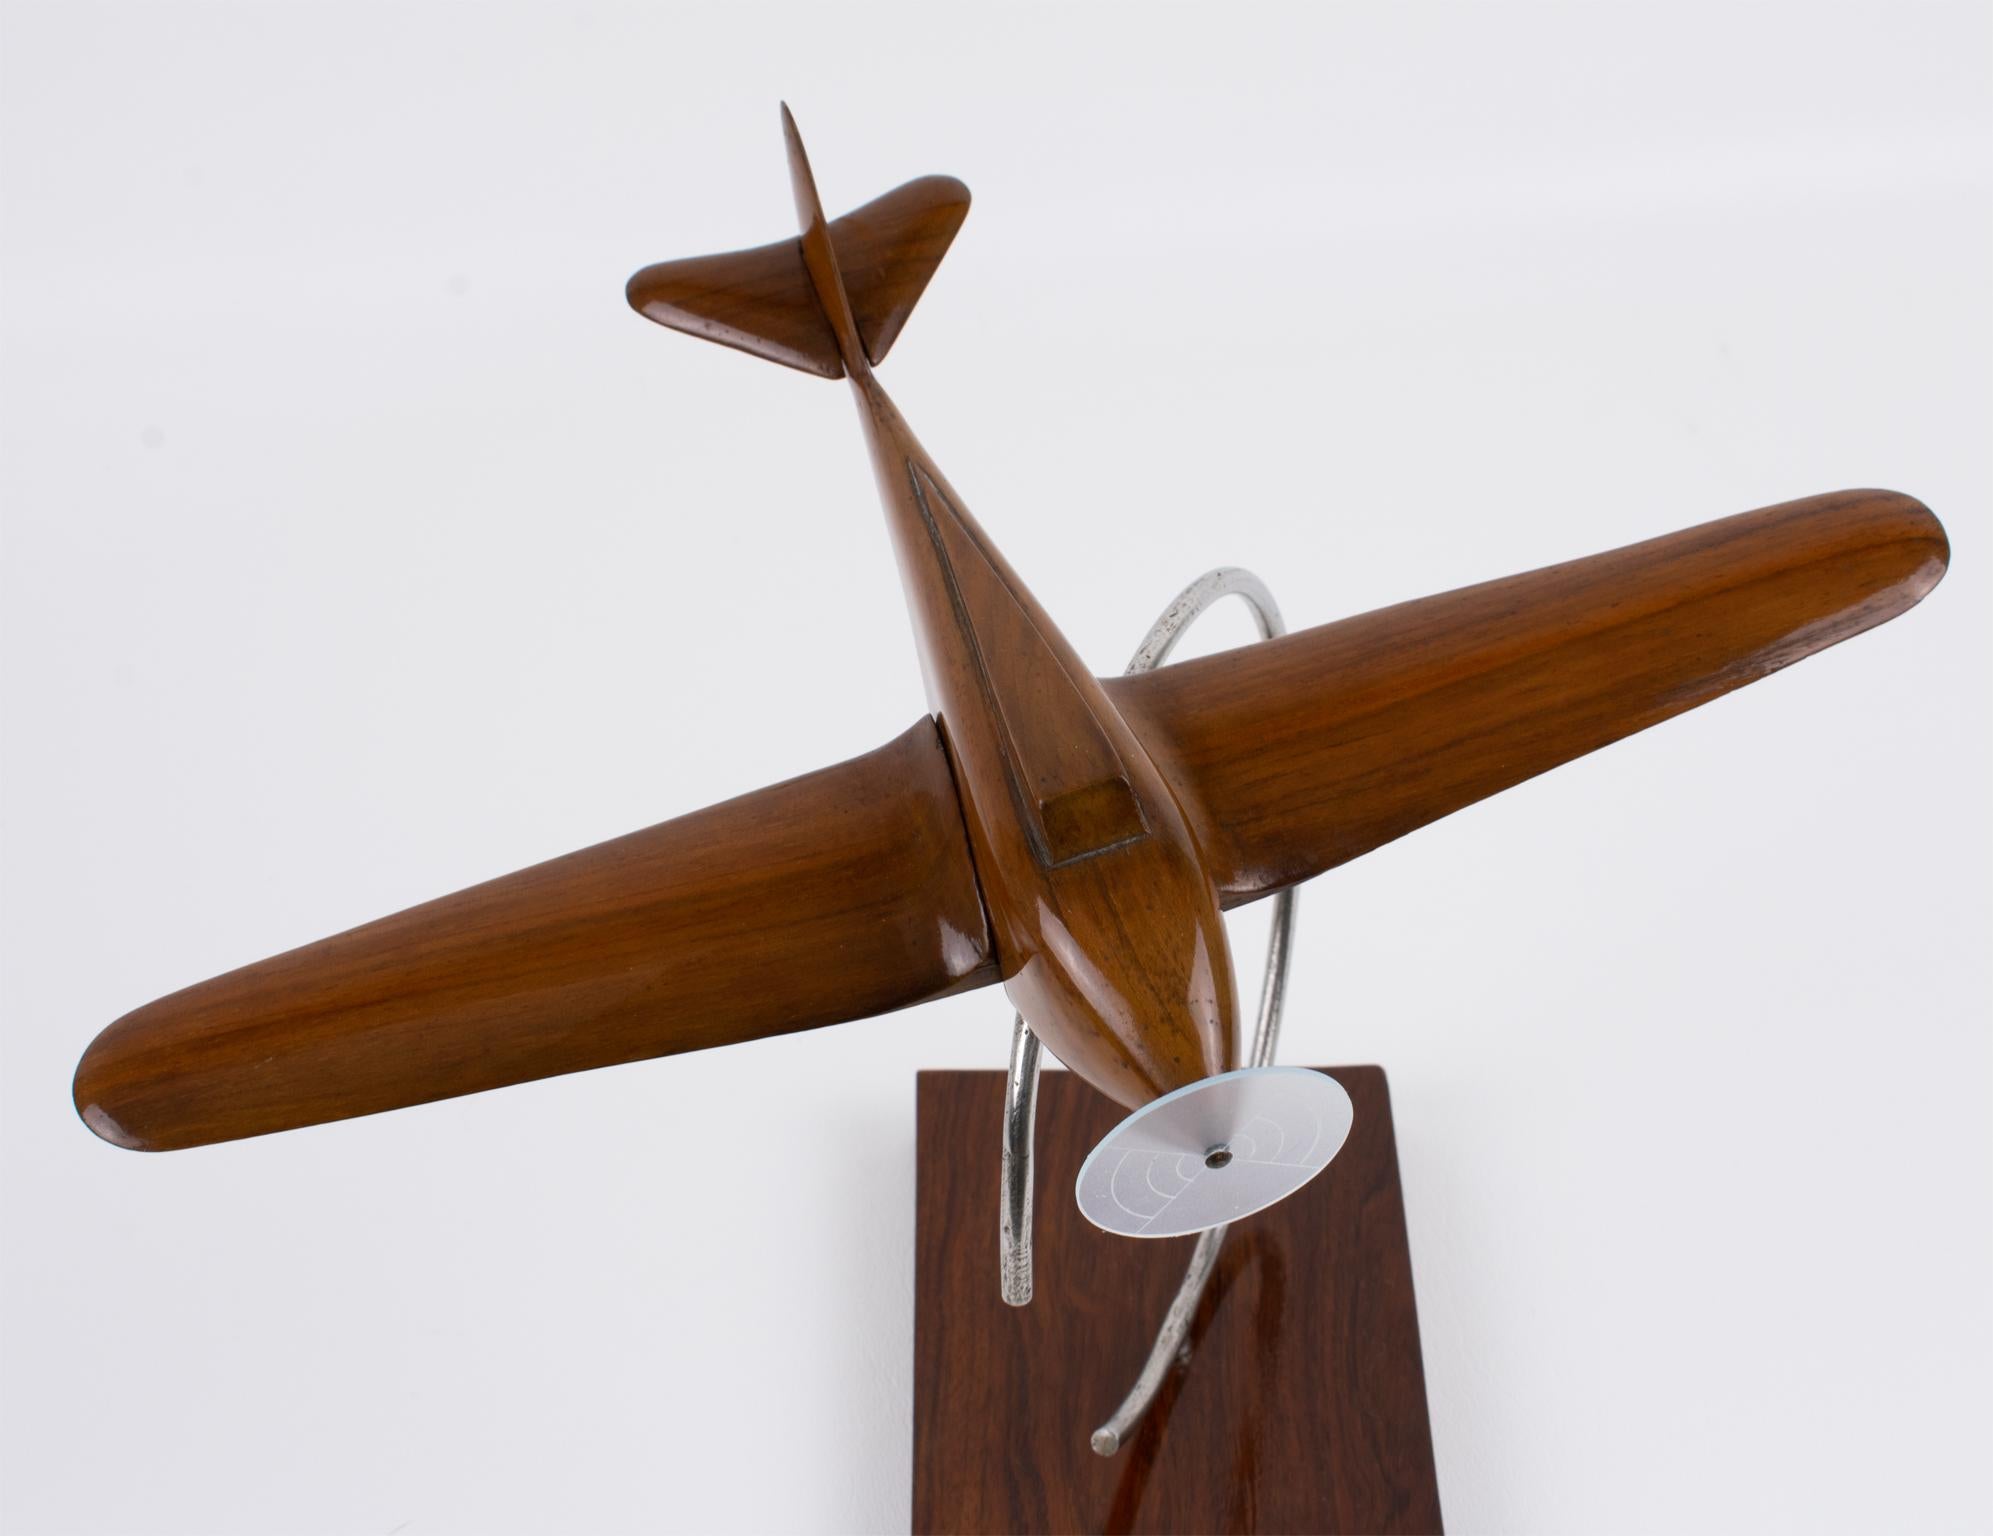 Art Deco Wood and Metal Airplane Aviation Propeller Model, France 1930s For Sale 7